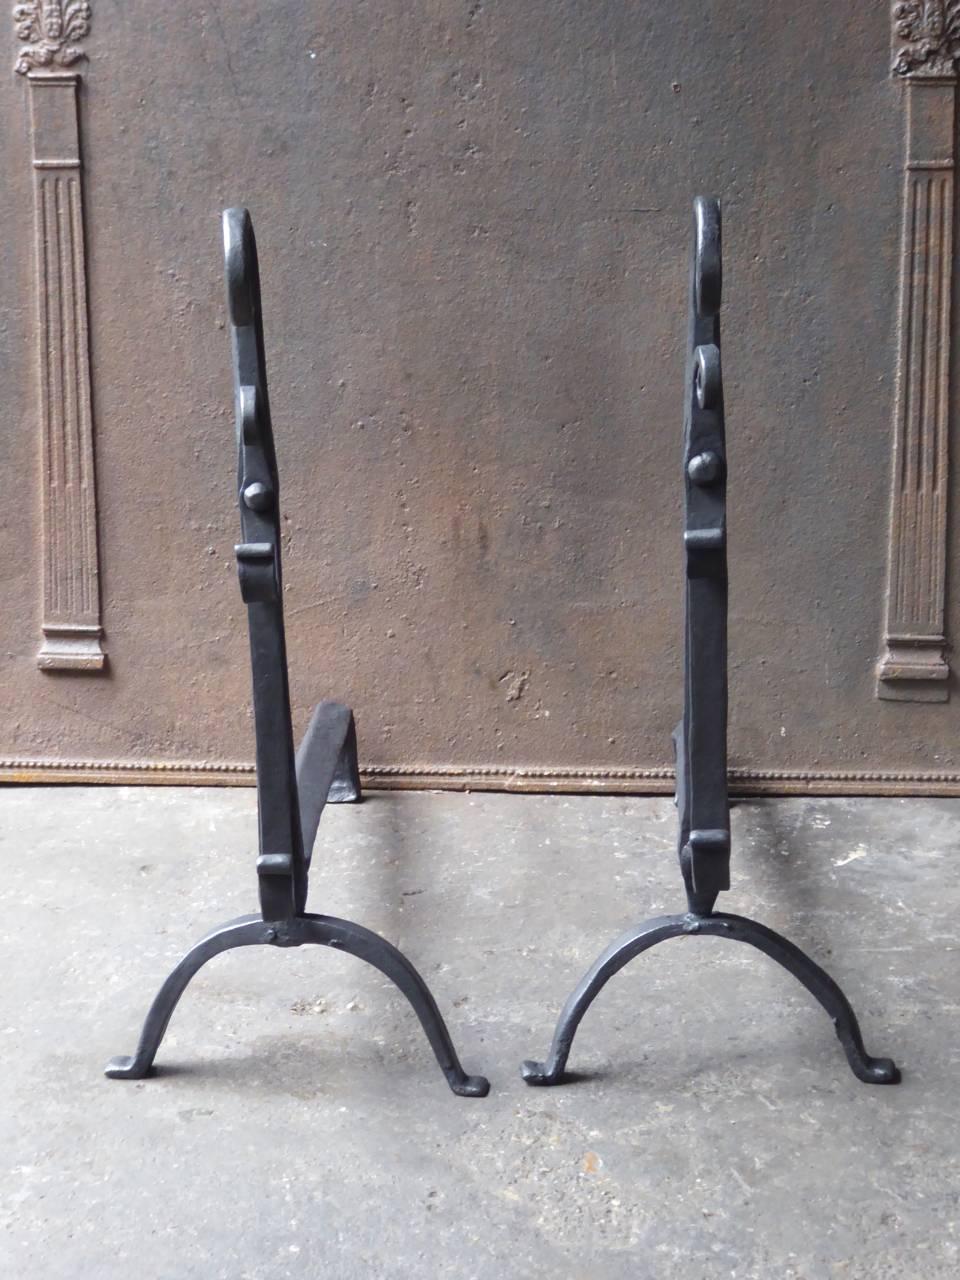 17th-18th century, French Gothic style fire dogs made of wrought iron.